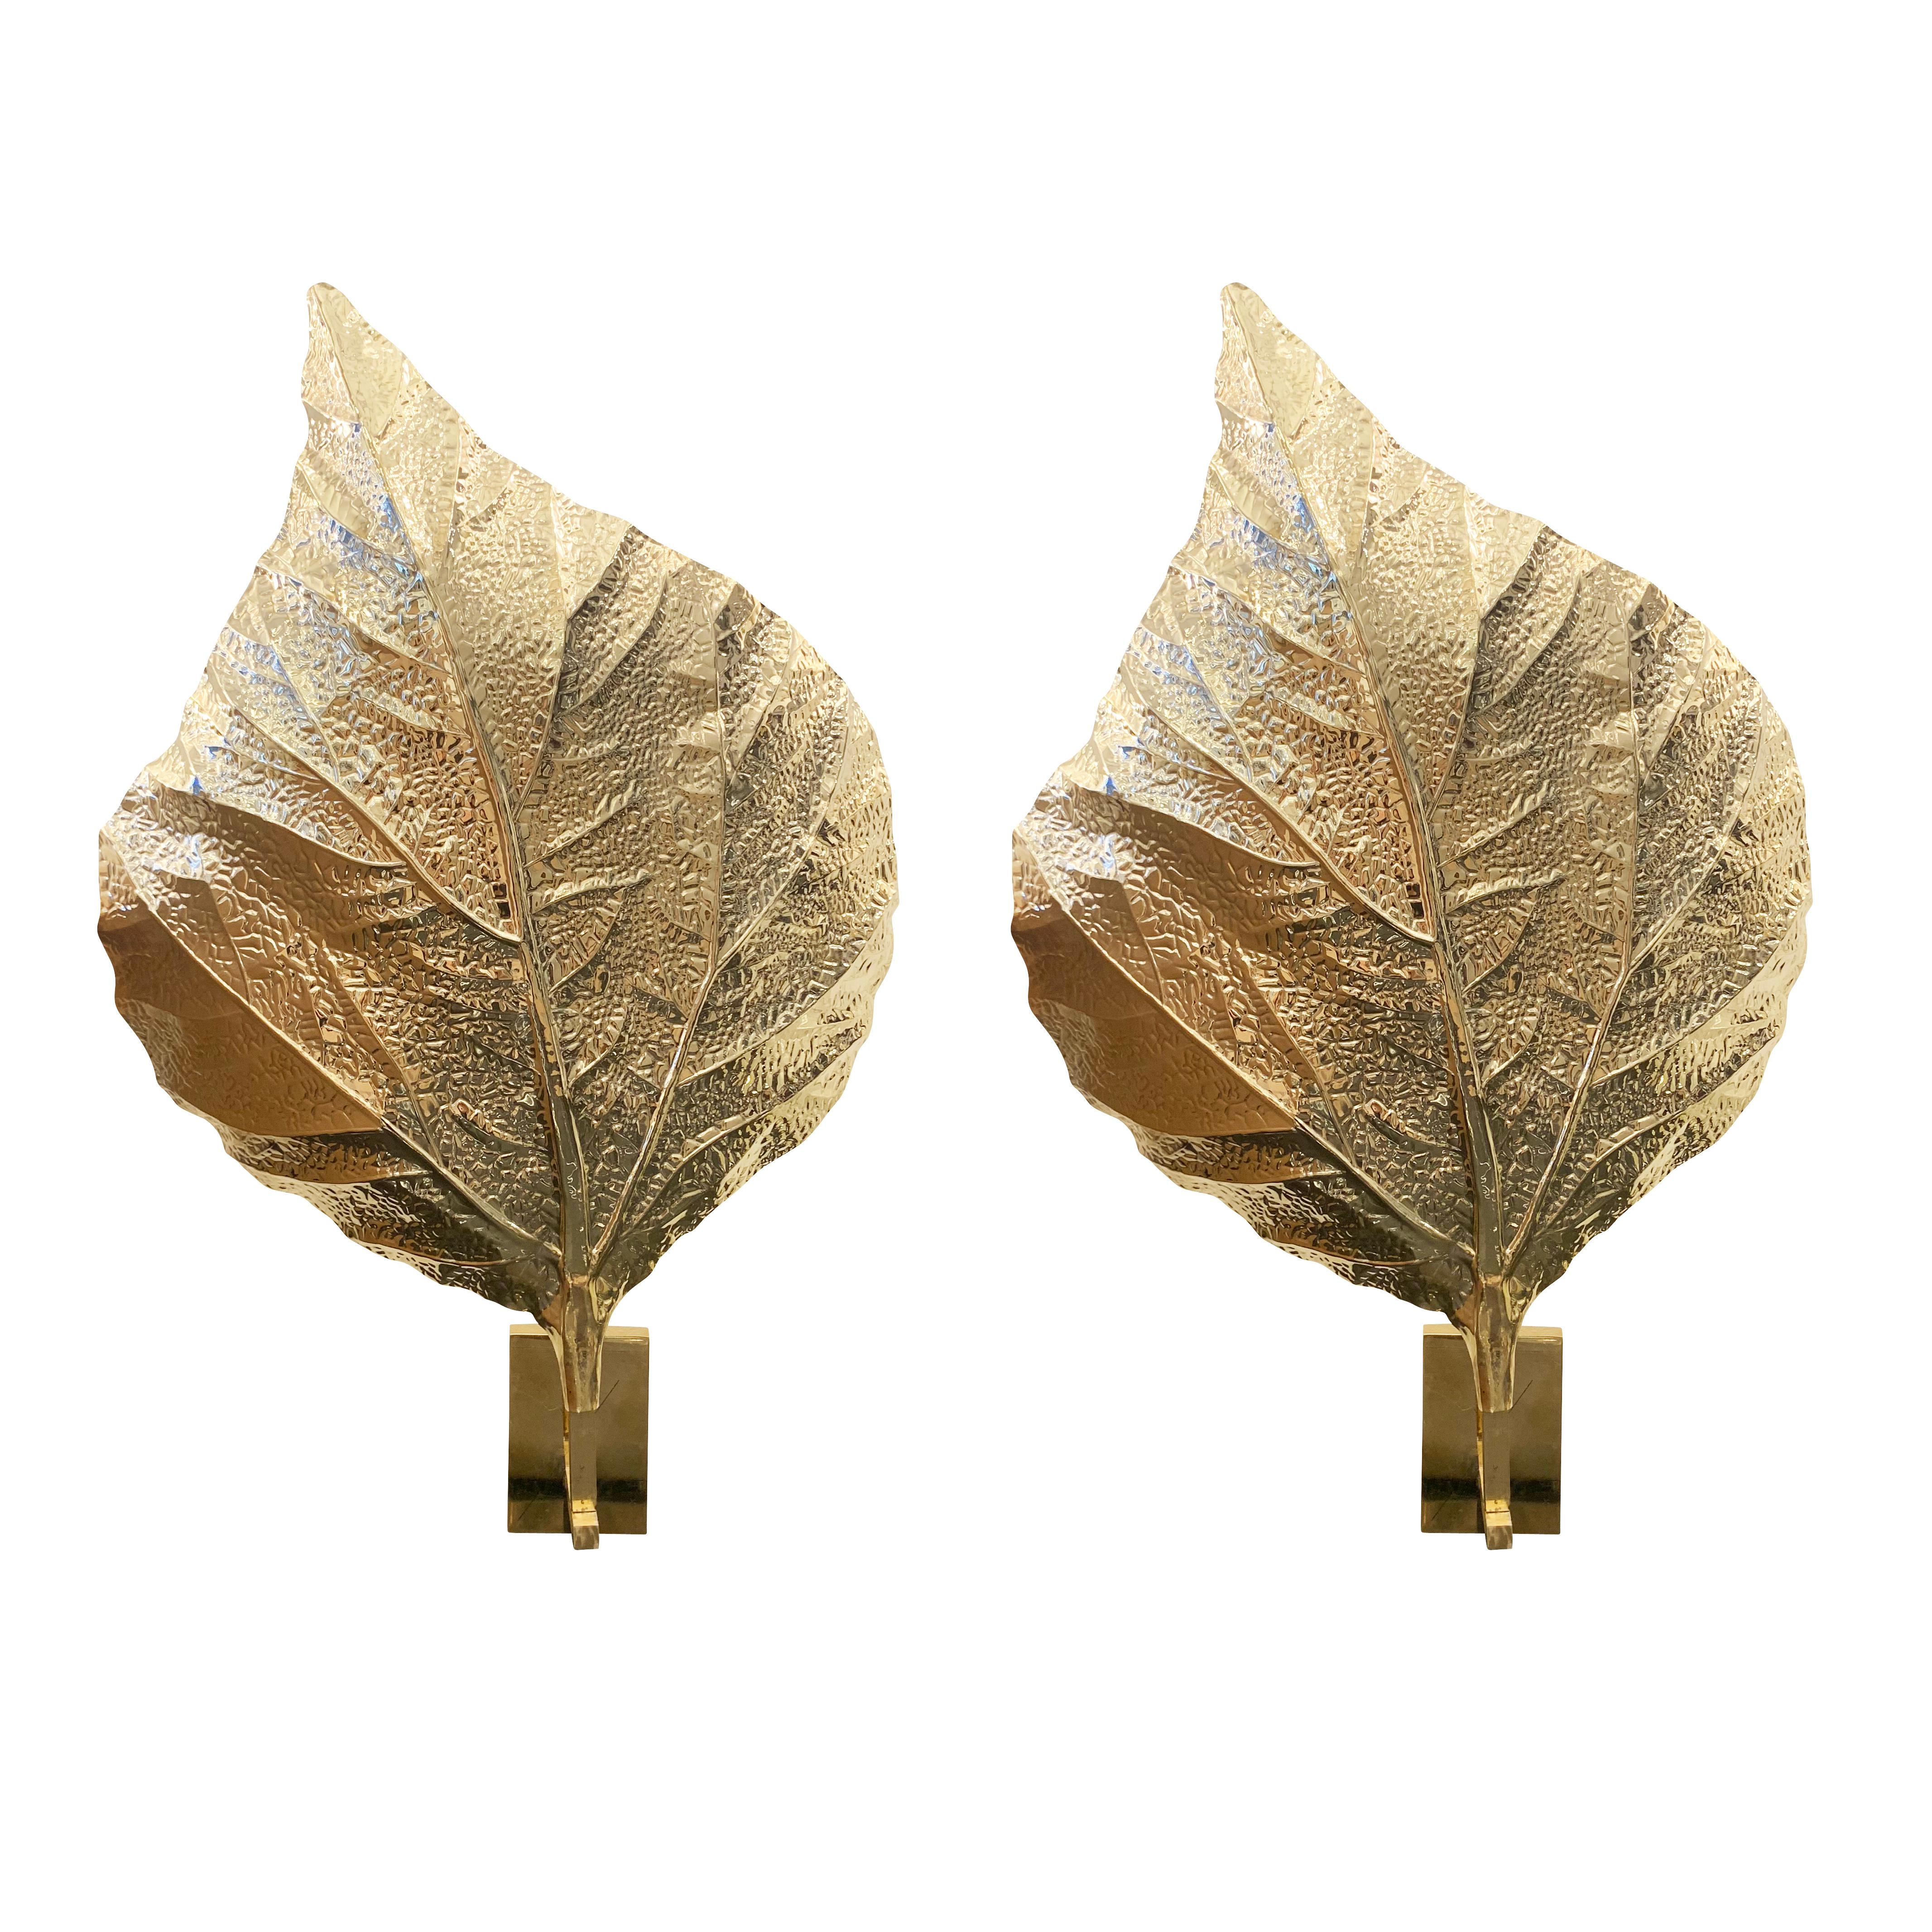 Italian Mid-Century wall lights by Tommaso Barbi each featuring a finely detailed large brass leaf shade.

Condition: Excellent vintage condition, minor wear consistent with age and use.

Width: 20”

Height: 29”

Depth: 6”

Ref#: LTZ899
